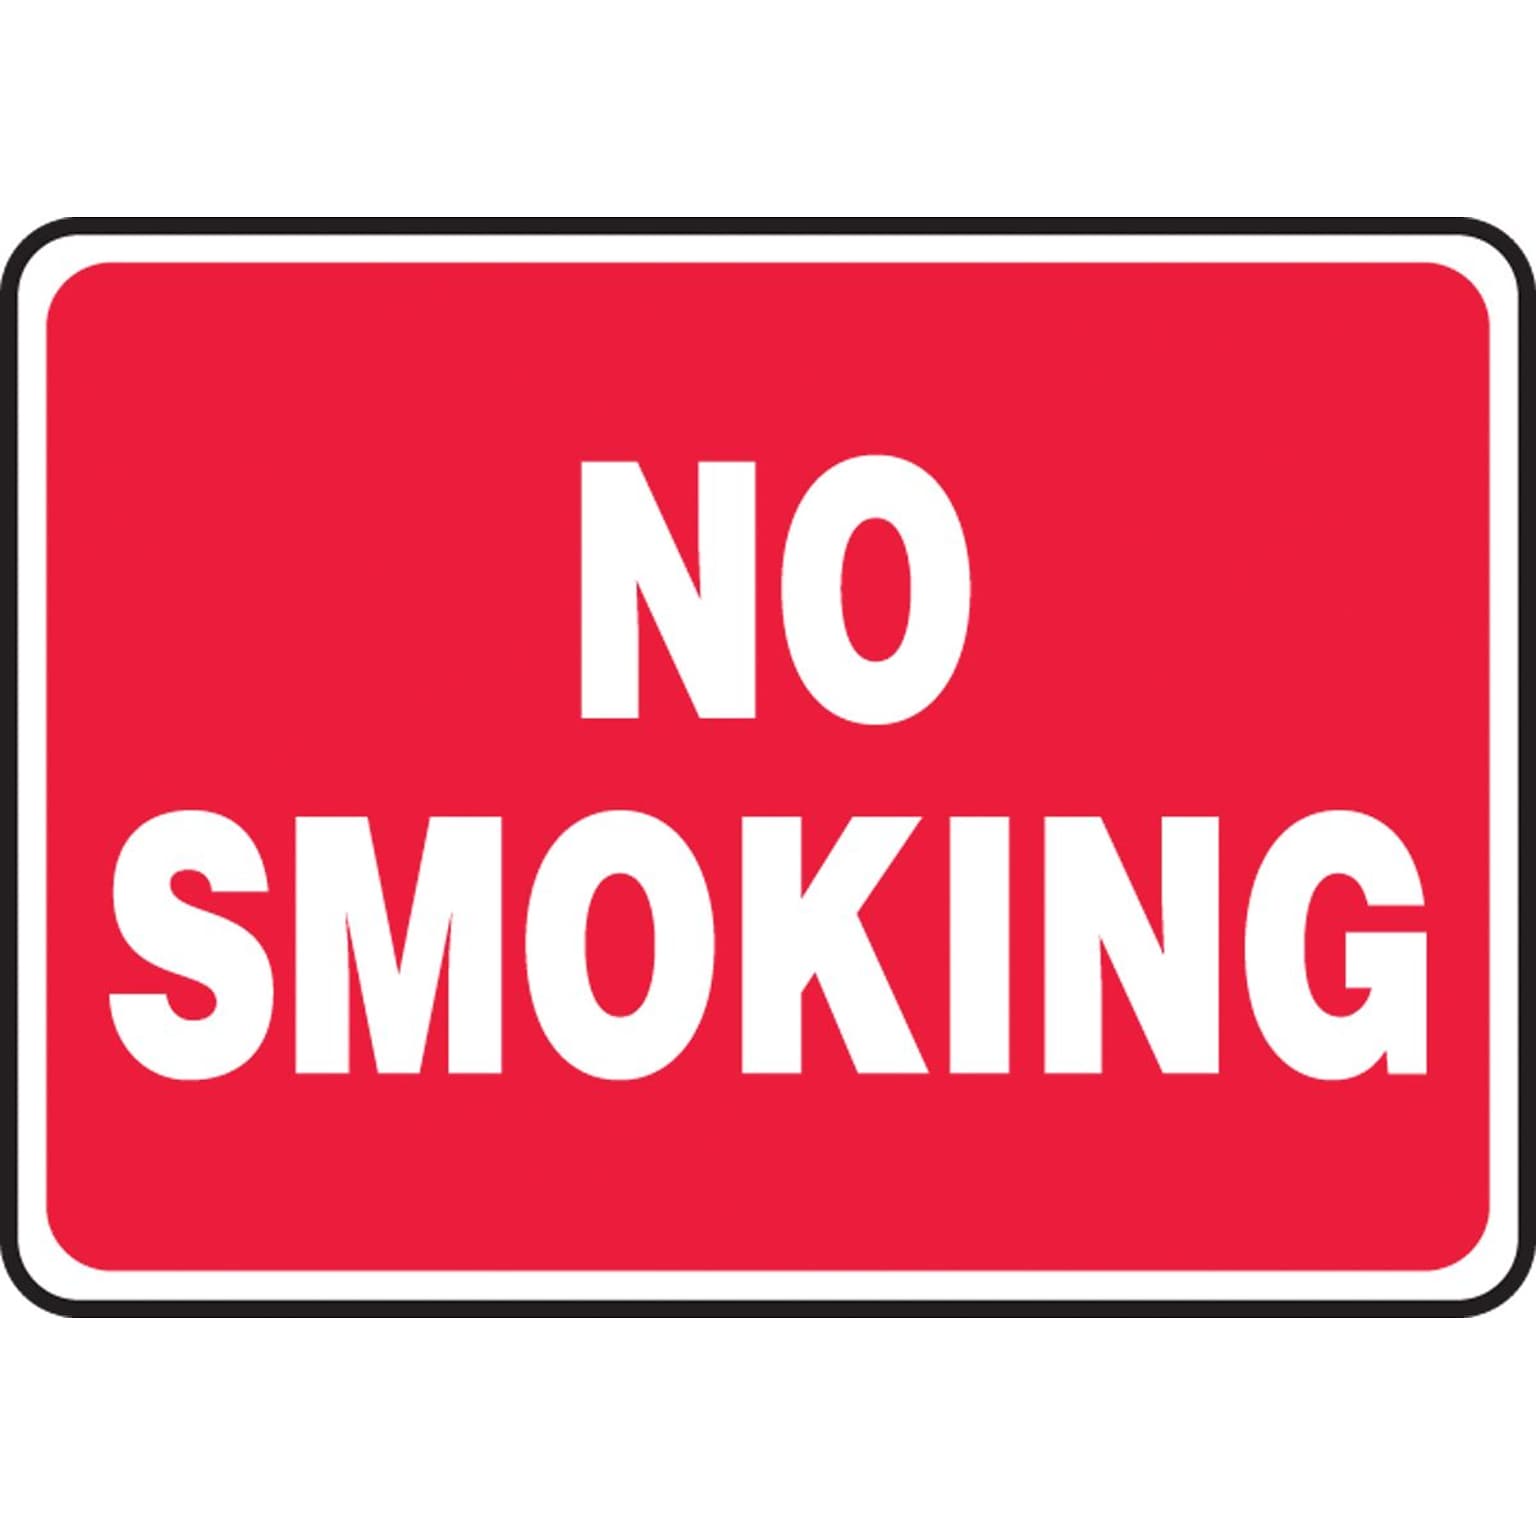 Accuform Signs® 10 x 14 Adhesive Vinyl Smoking Control Sign NO SMOKING, White On Red